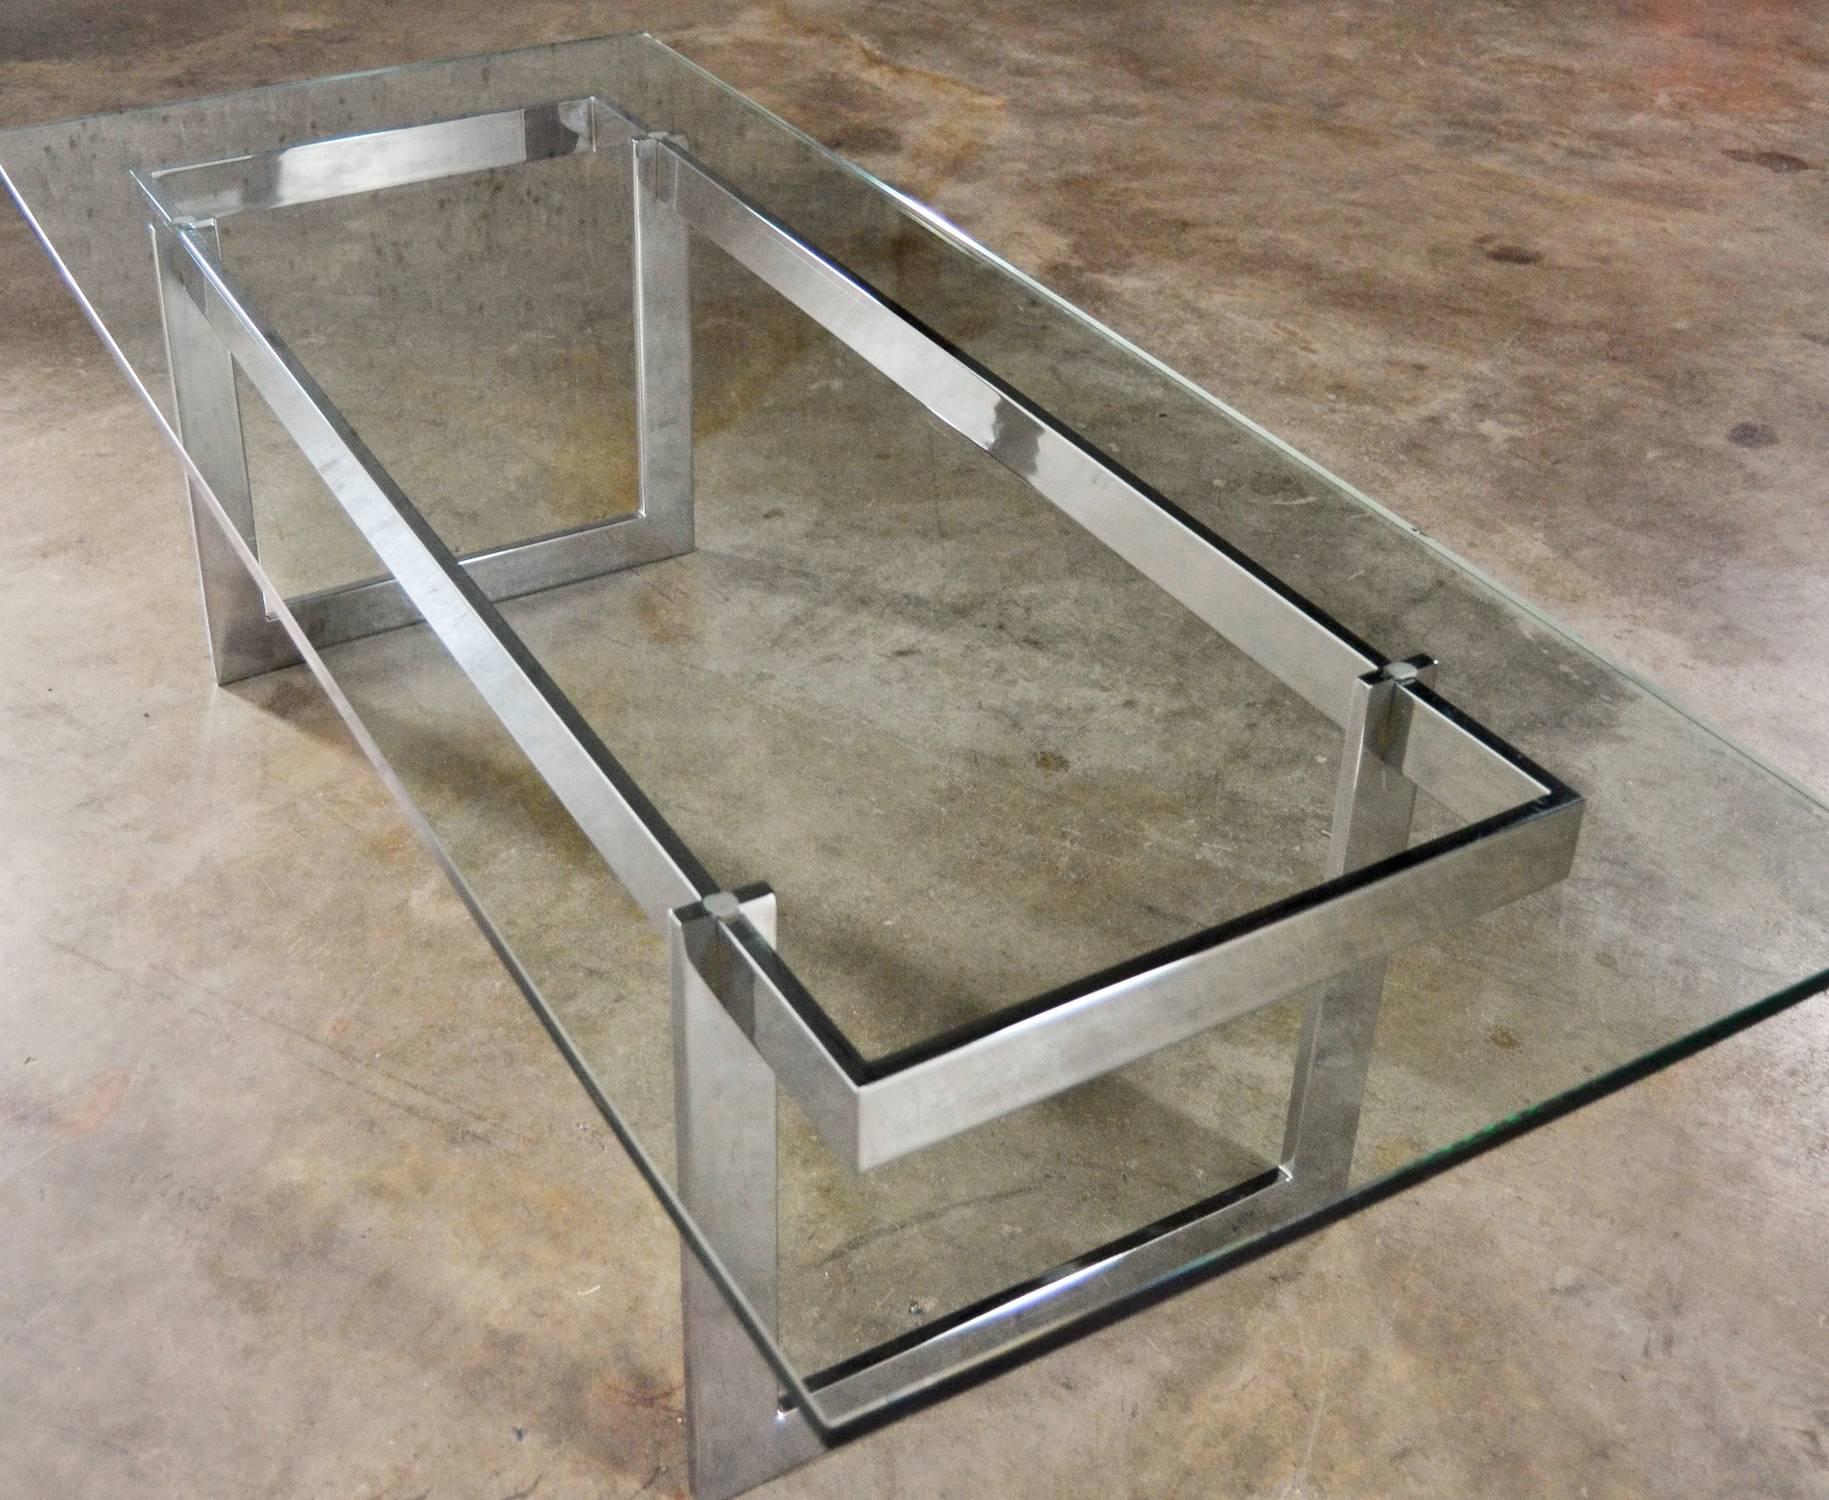 Fabulous rectangular chrome and glass Mid-Century Modern coffee table in the style of Milo Baughman. This circa 1970s coffee table is in wonderful vintage condition. Couldn’t identify this coffee table’s maker but it is done in the style of Milo